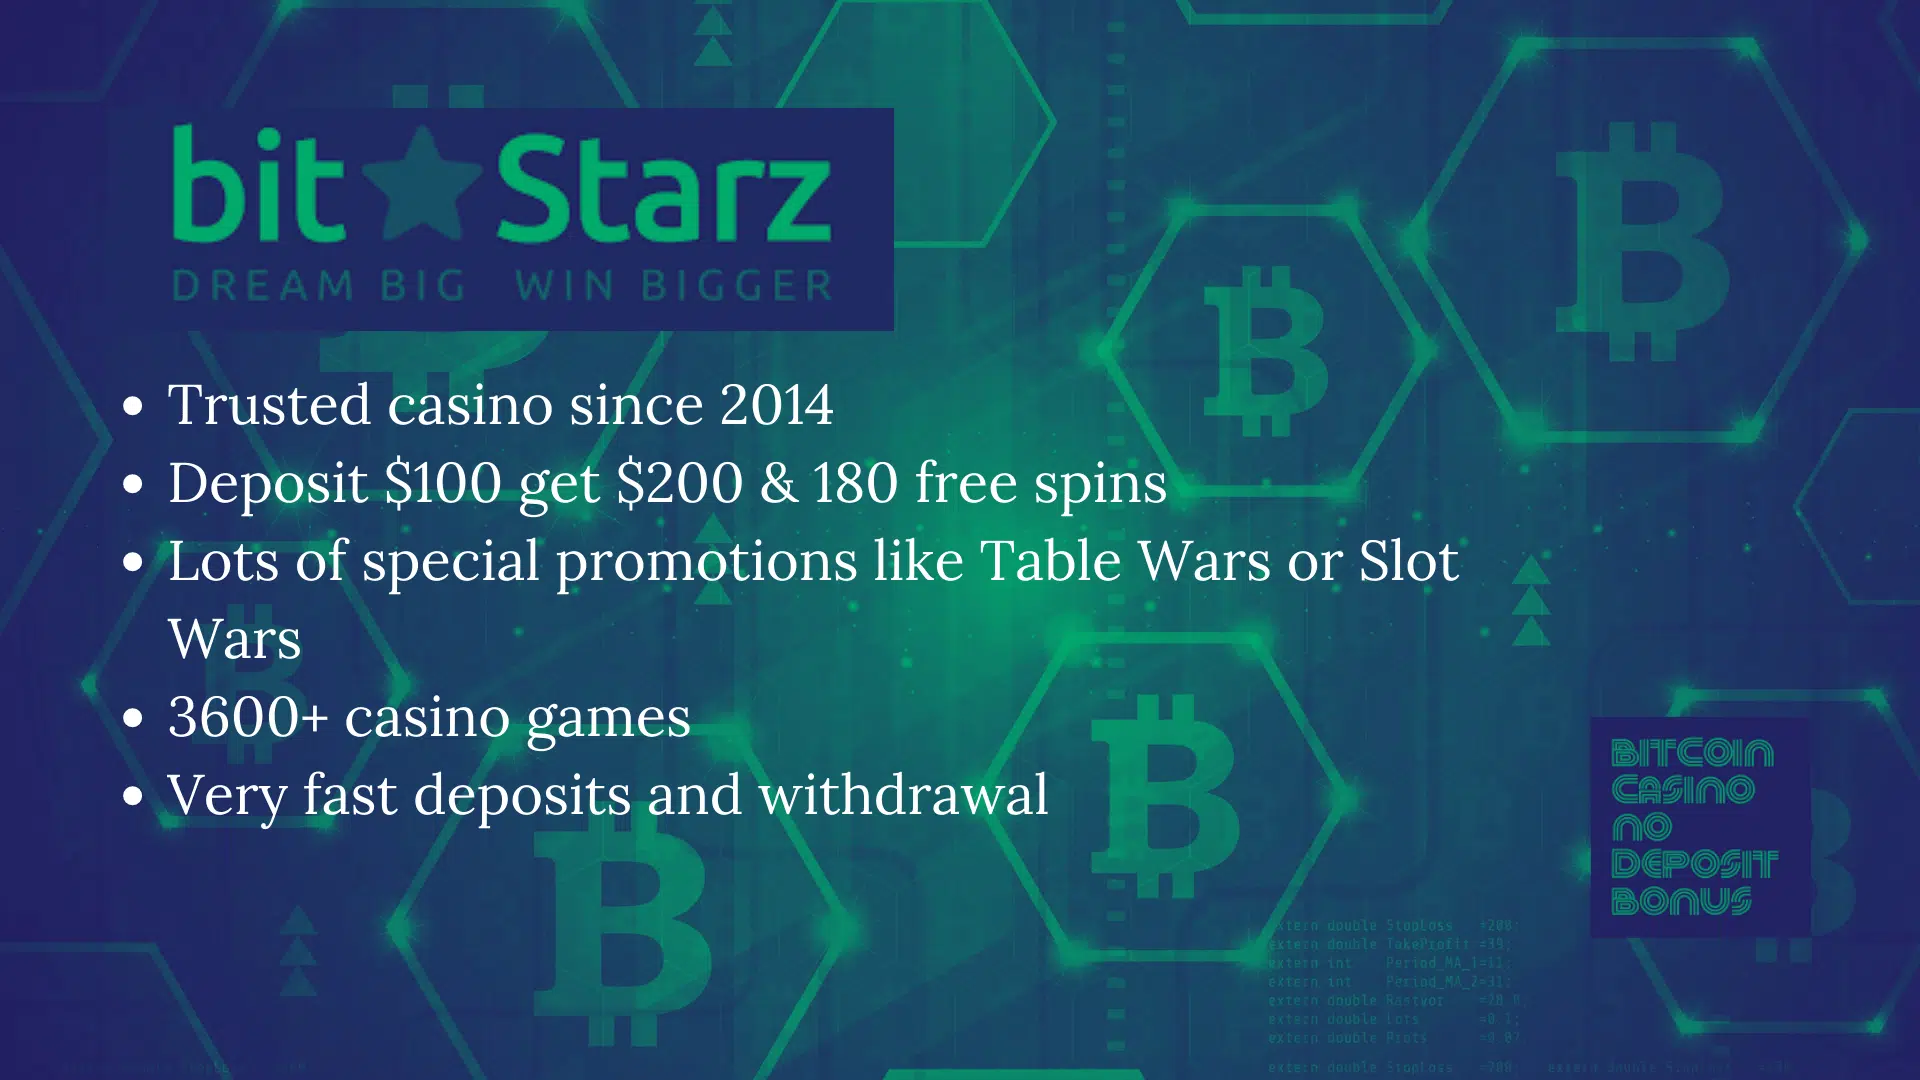 You are currently viewing Maximize Your Winnings with Bitstarz Promo Code and Free Bonus Codes on Bitstarz.com